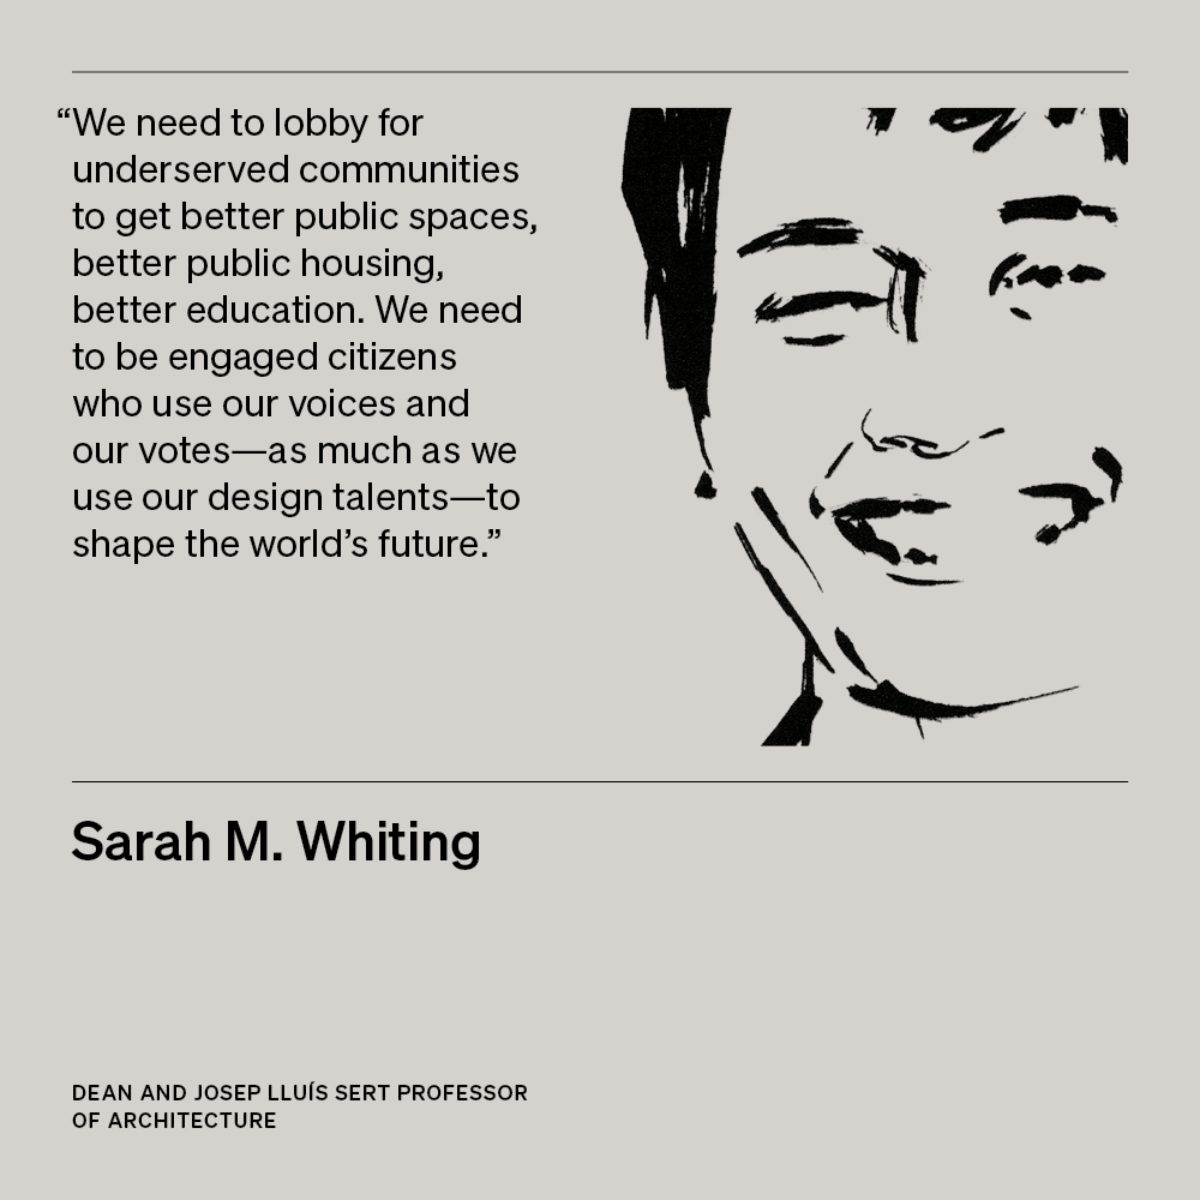 Illustration of Sarah Whiting, Dean and Josep Lluís Sert Professor of Architecture, with text 